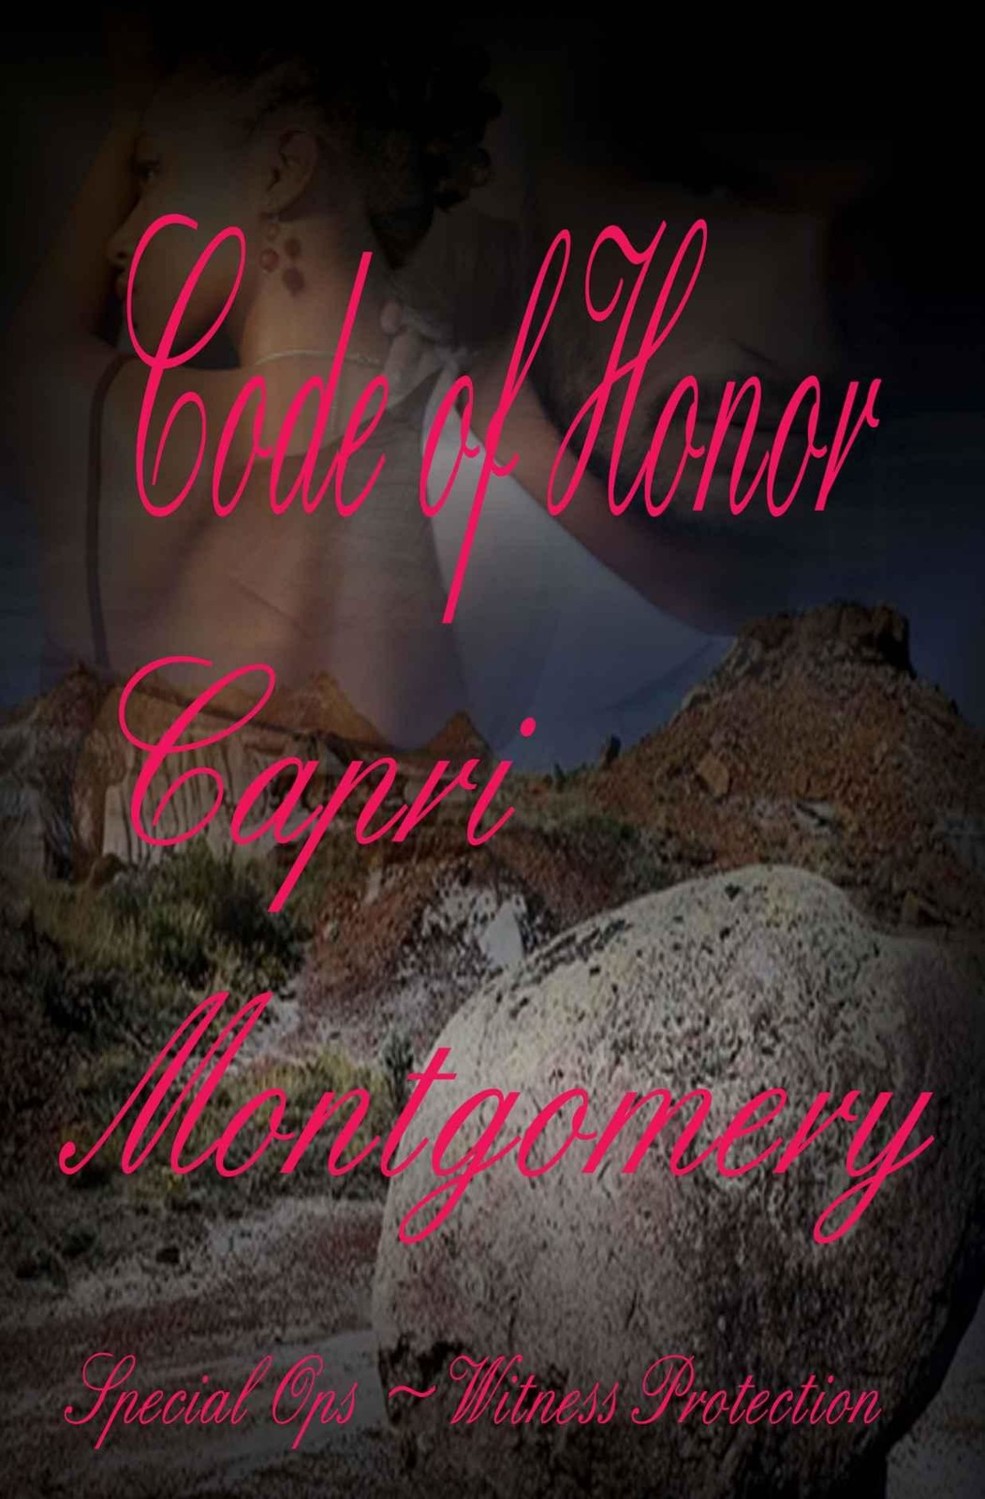 Code of Honor (Special Ops Book 7) by Capri Montgomery